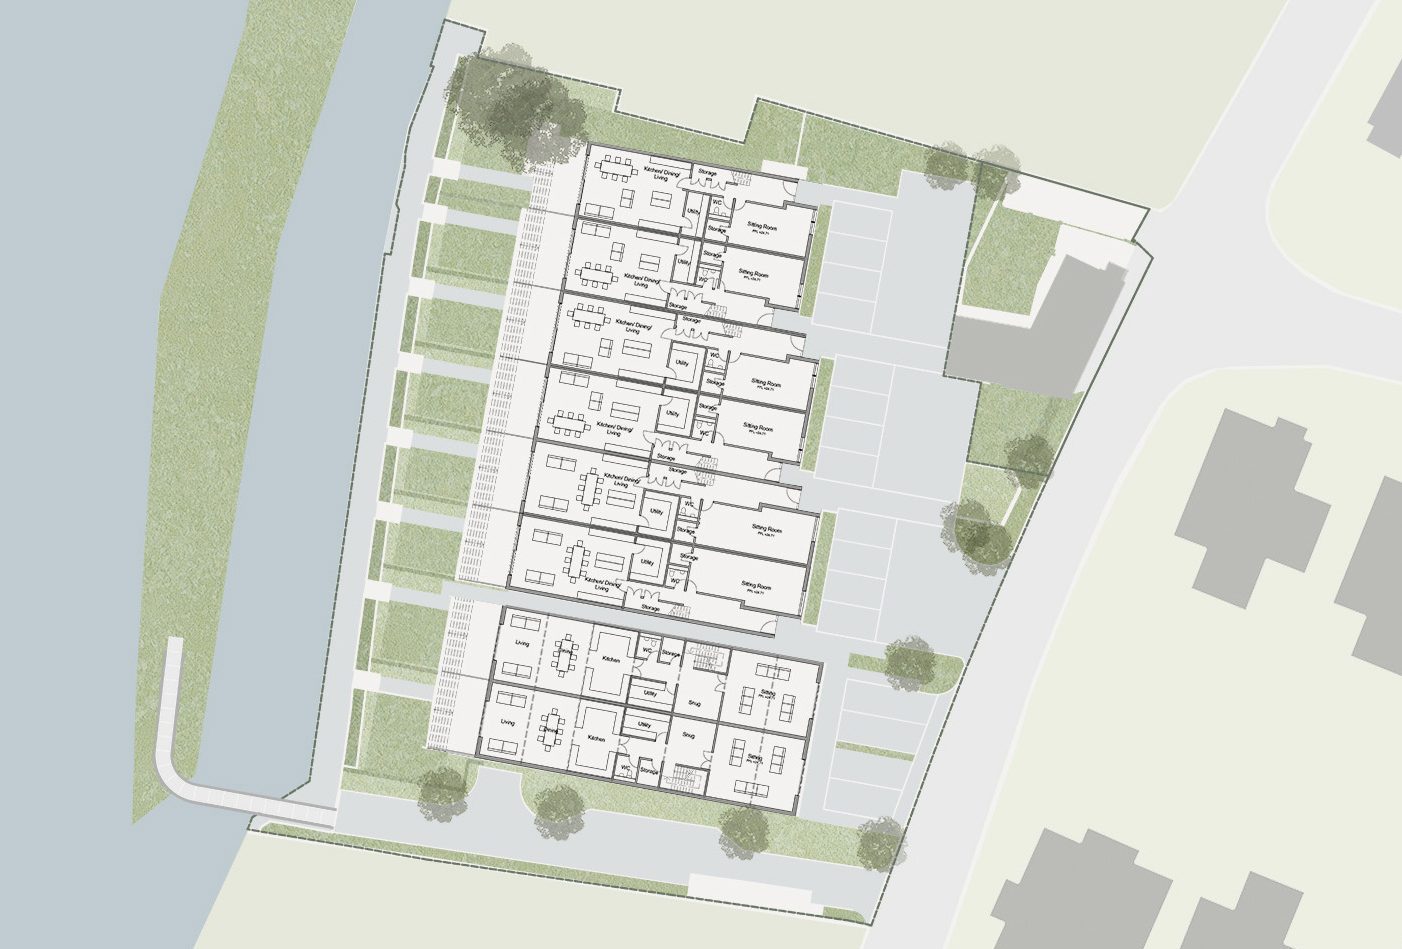 Ground floor plan of The Old Boathouse development at Taplow, Berkshire.